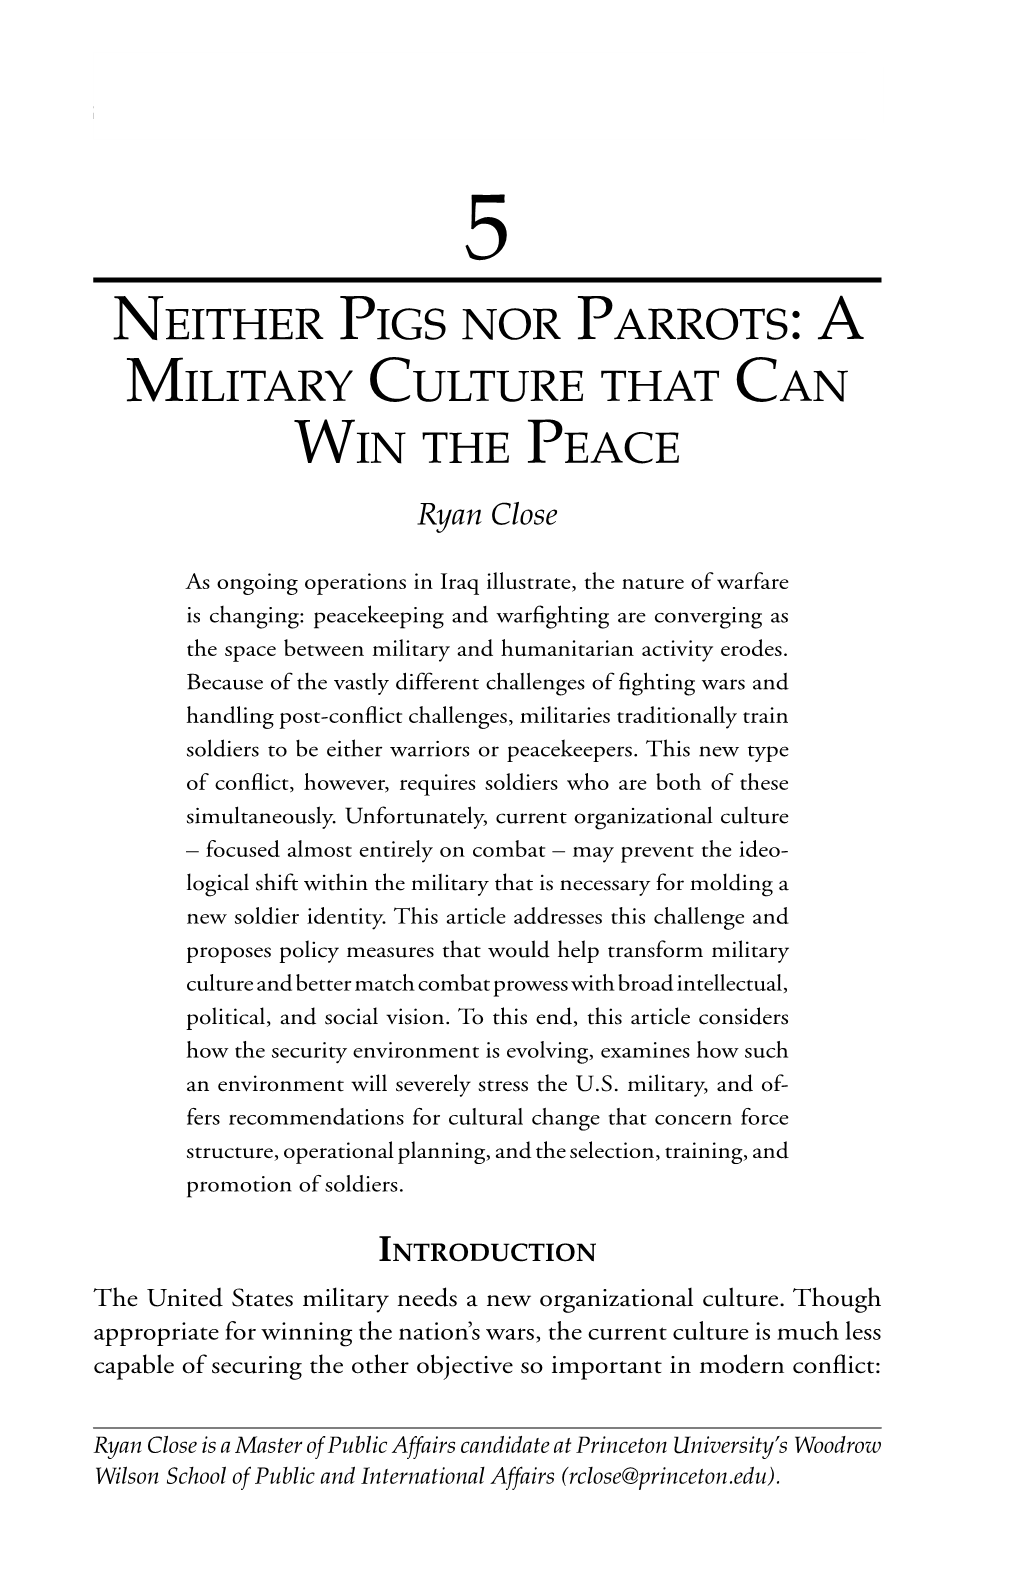 Neither Pigs Nor Parrots: a Military Culture That Can Win the Peace Ryan Close